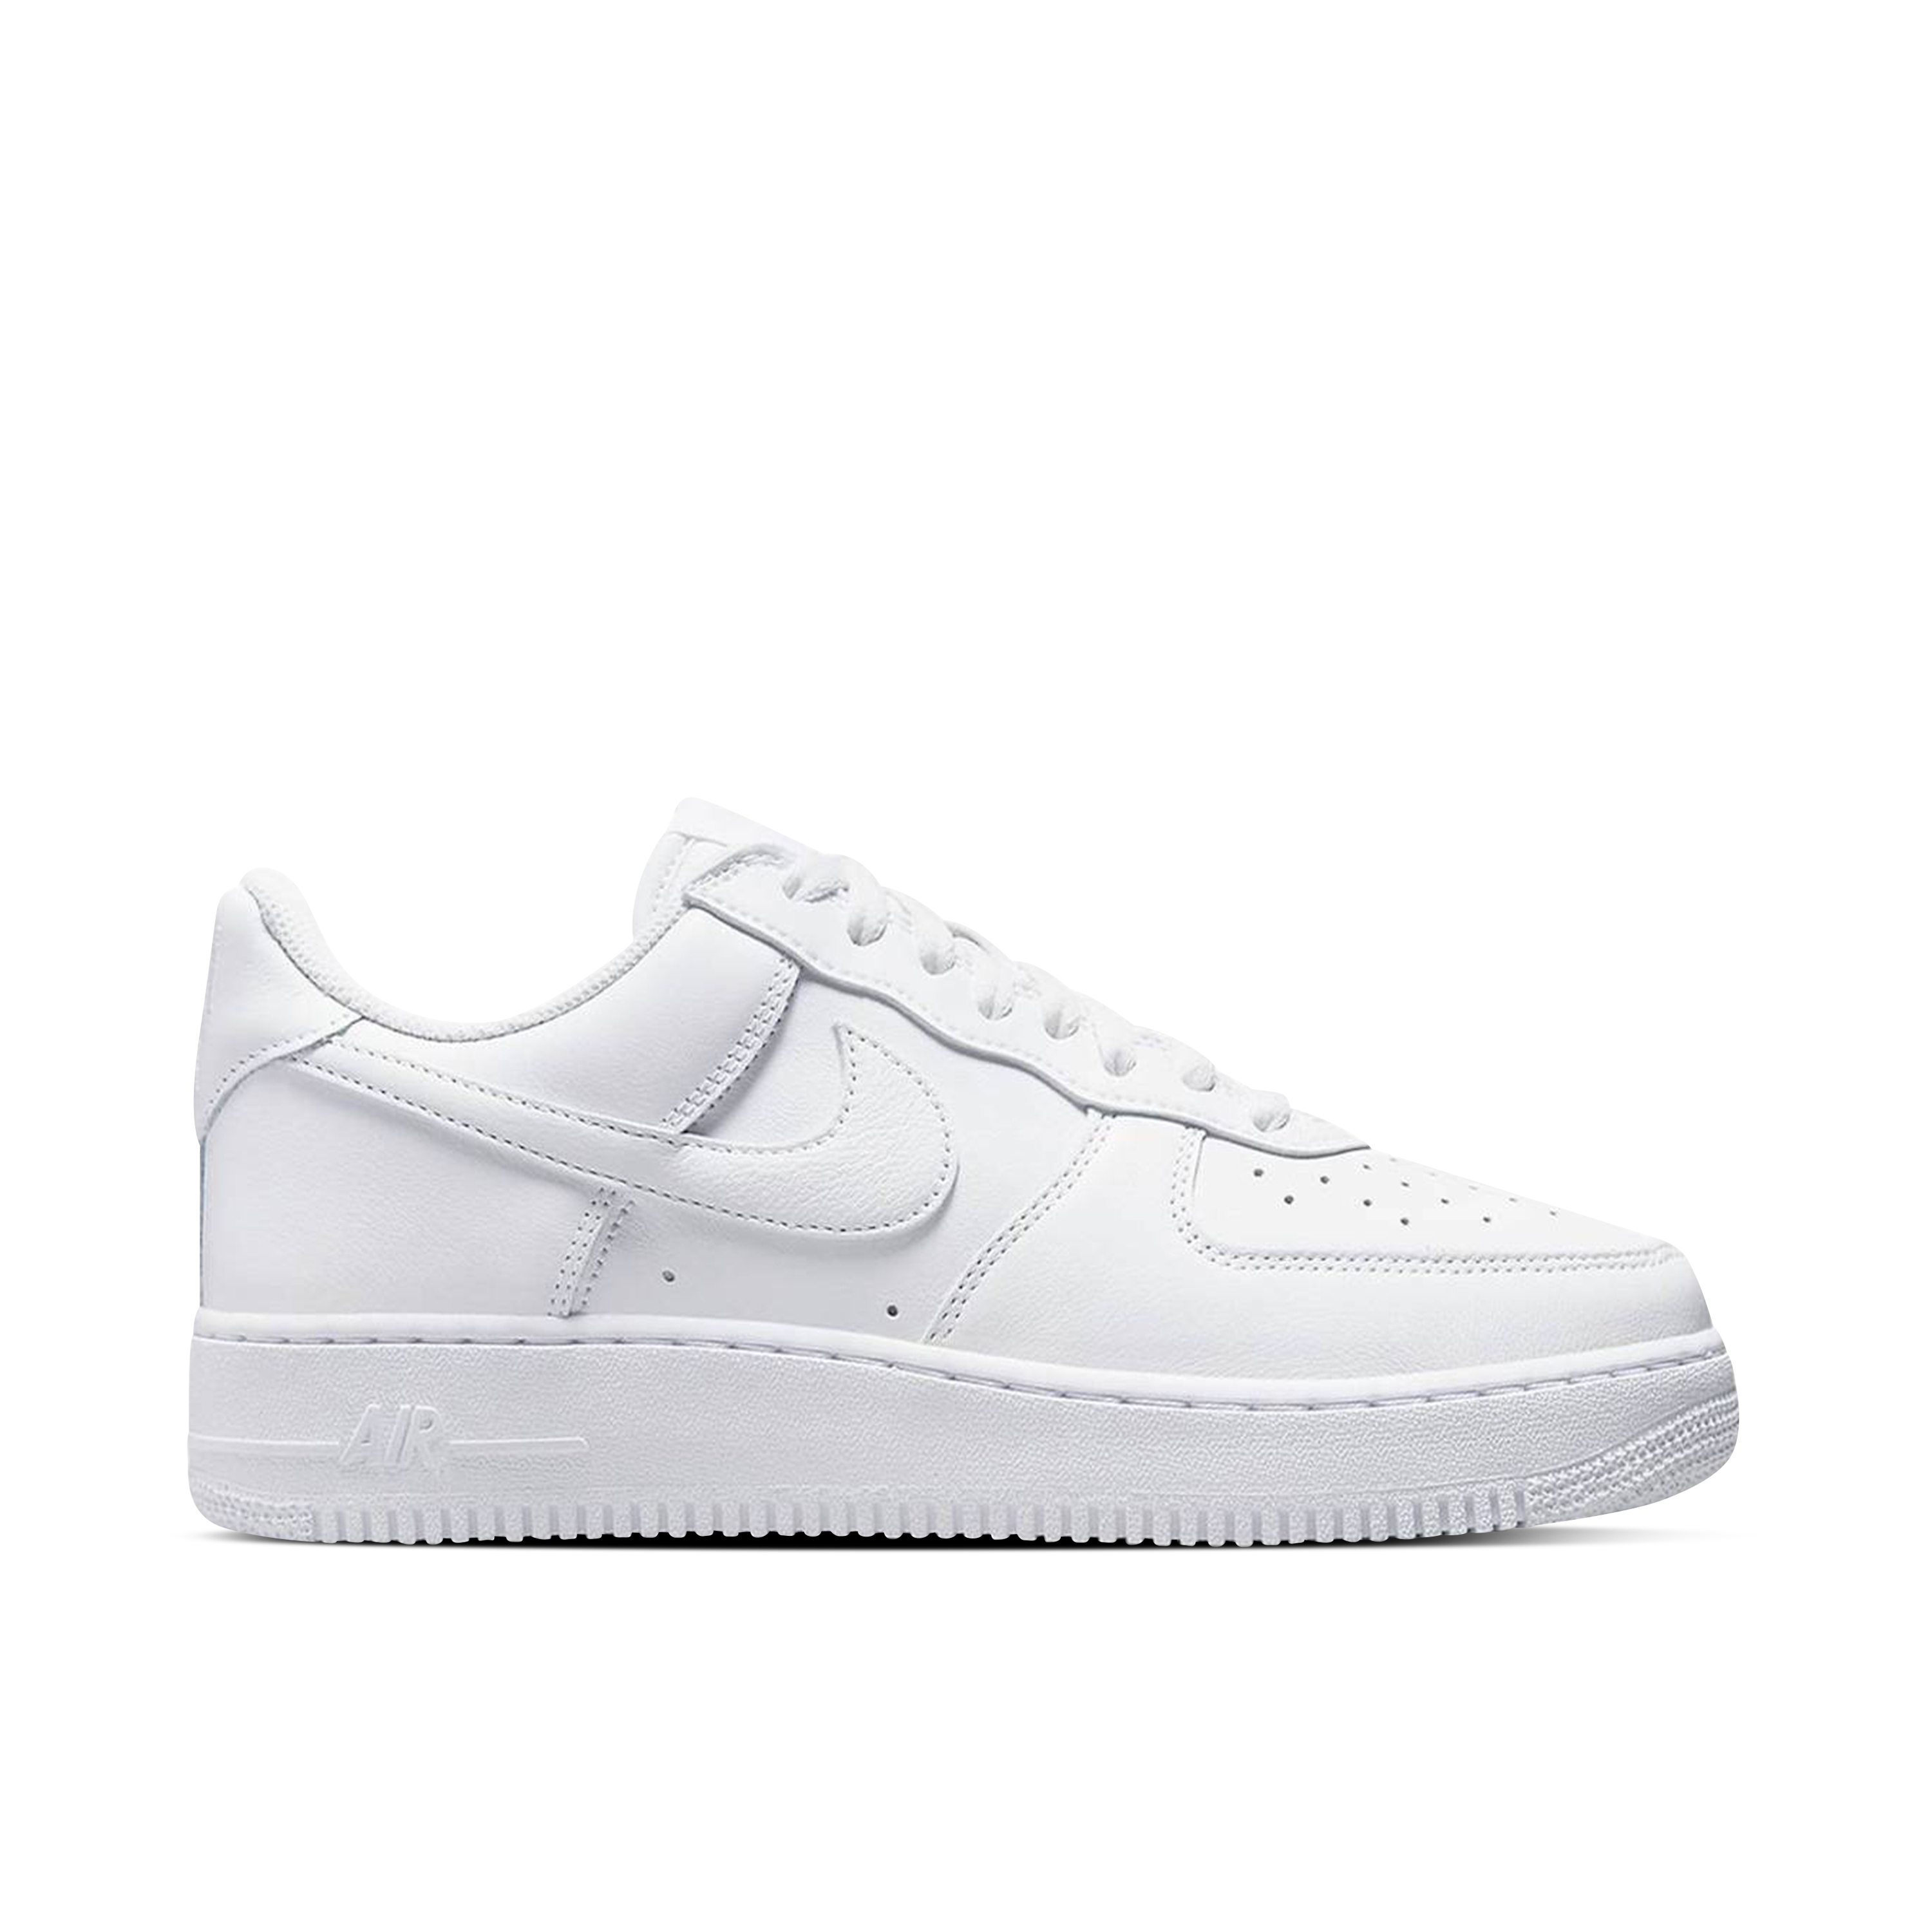 Nike Air Force 1 Low Since 82 White, DJ3911-100